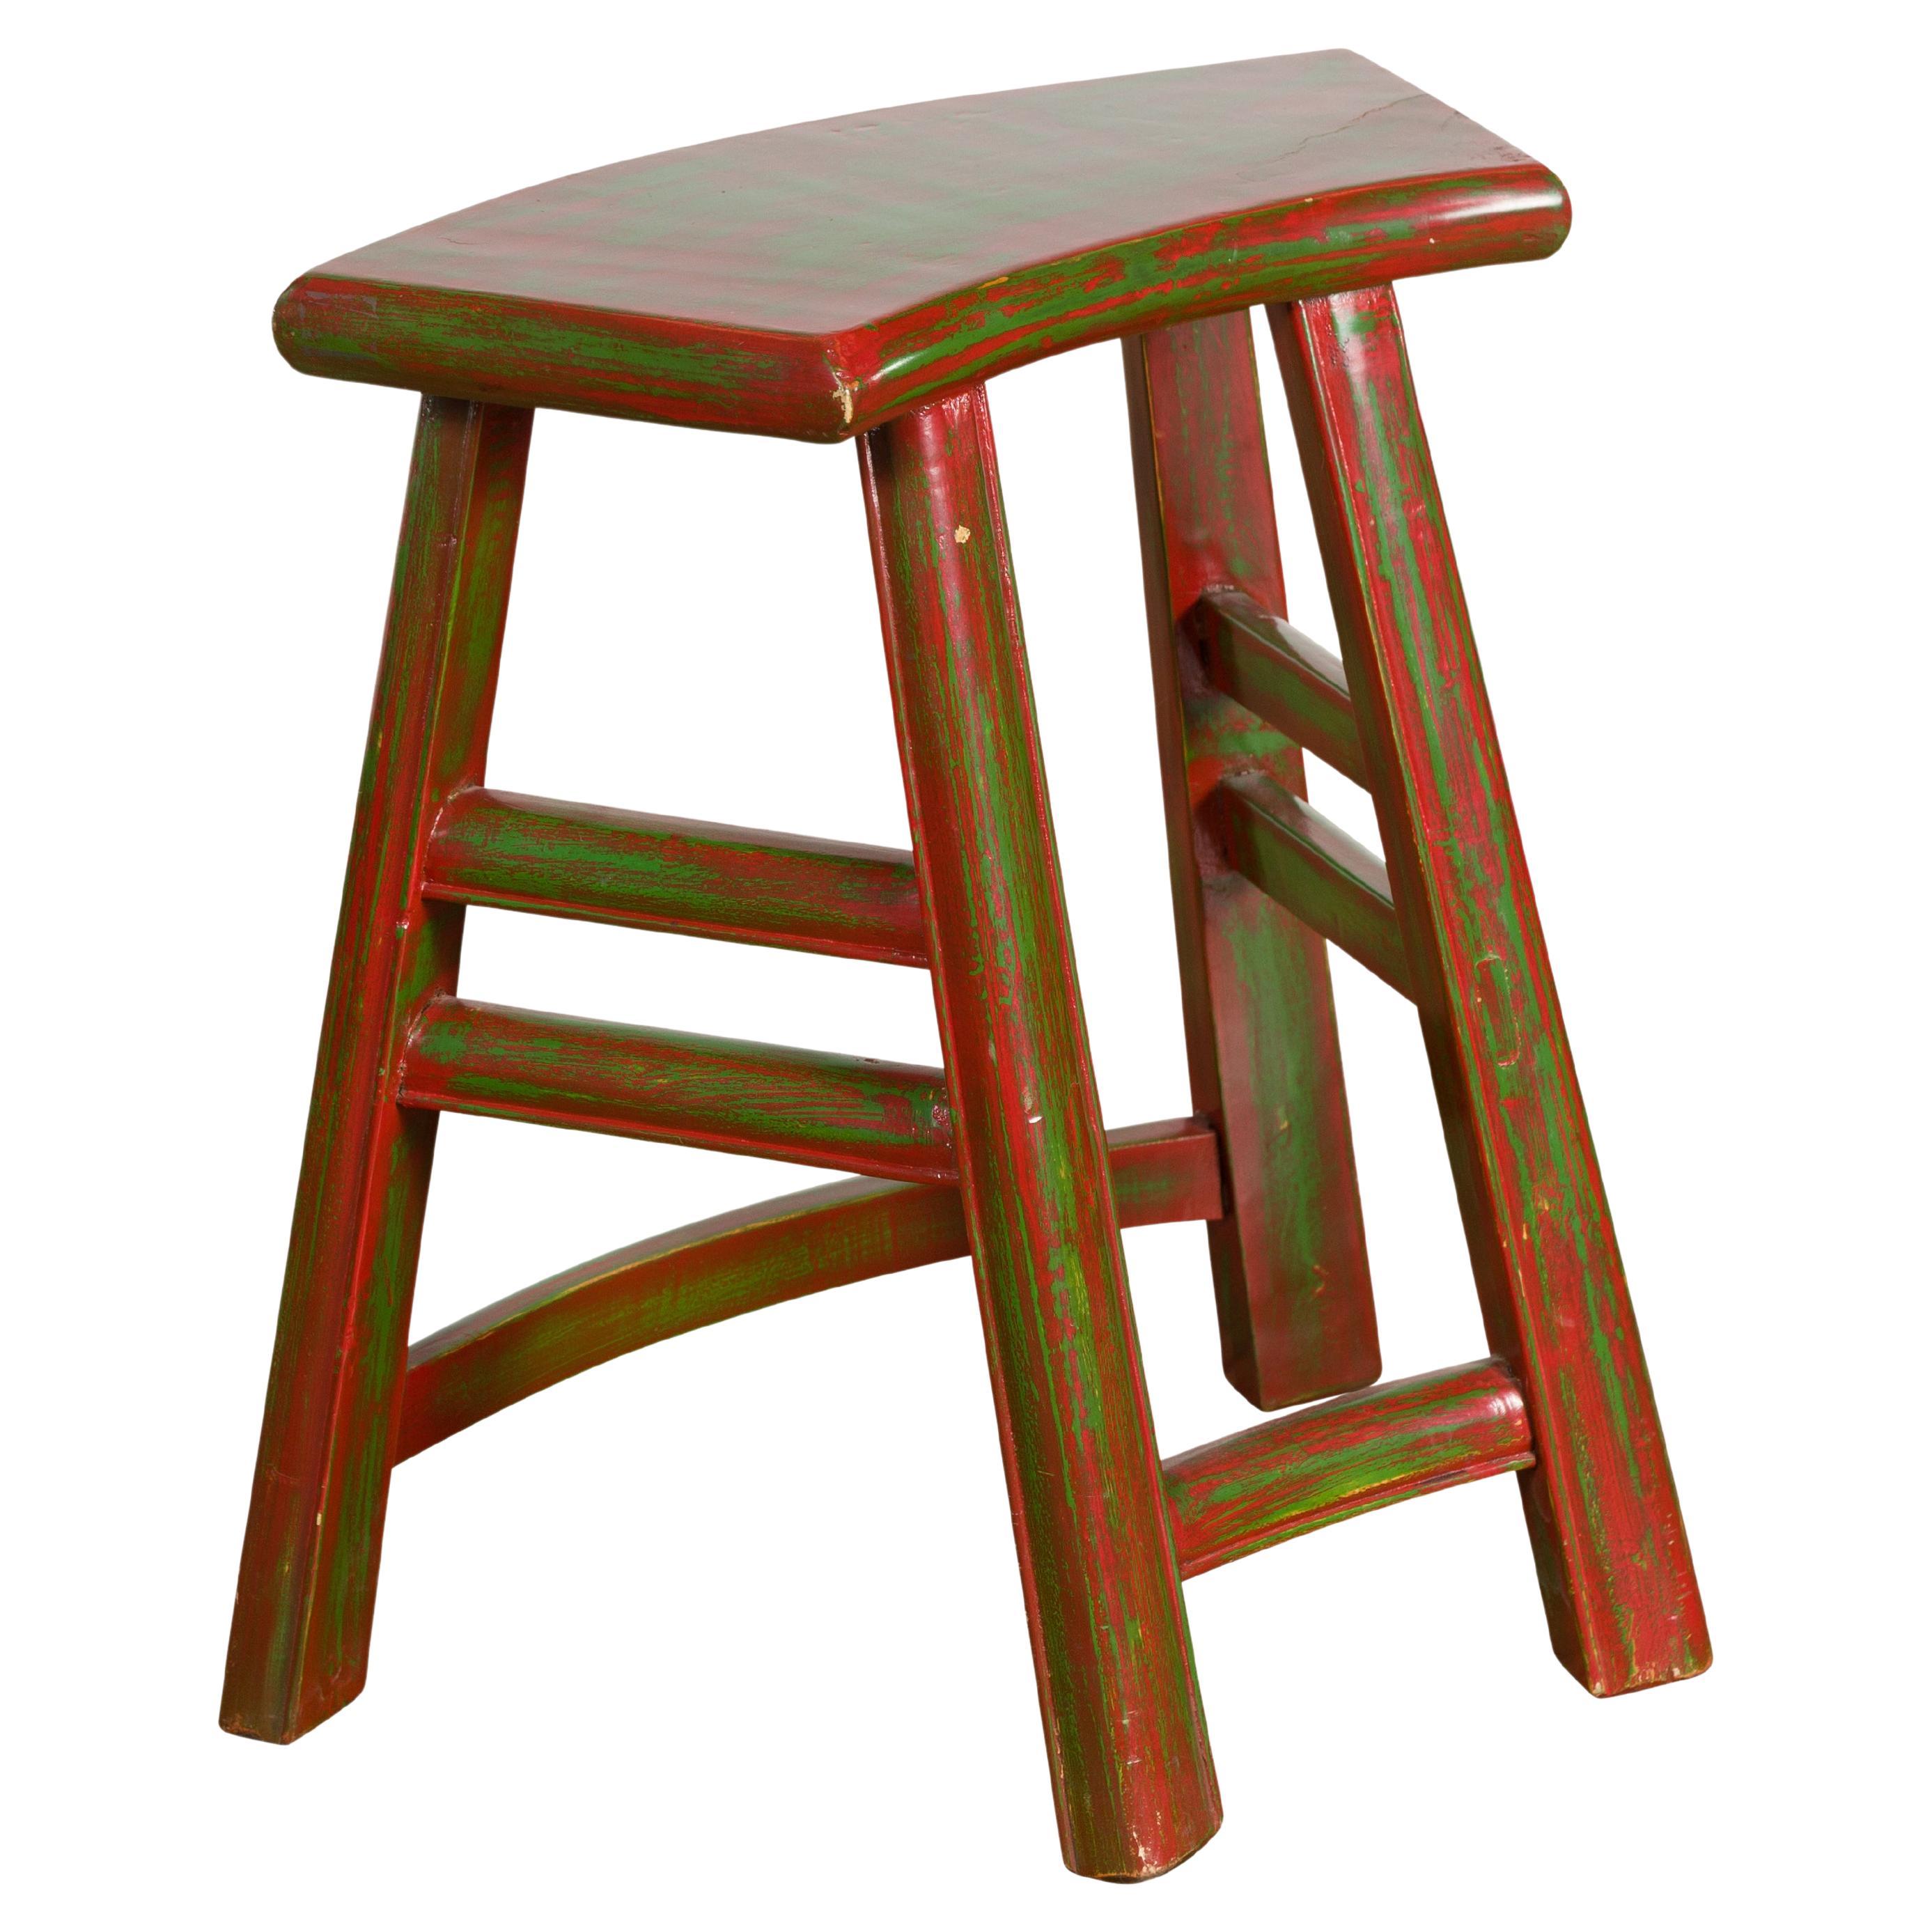 Japanese Late Meiji Period Red and Green Lacquered Stool with Semicircular Seat For Sale